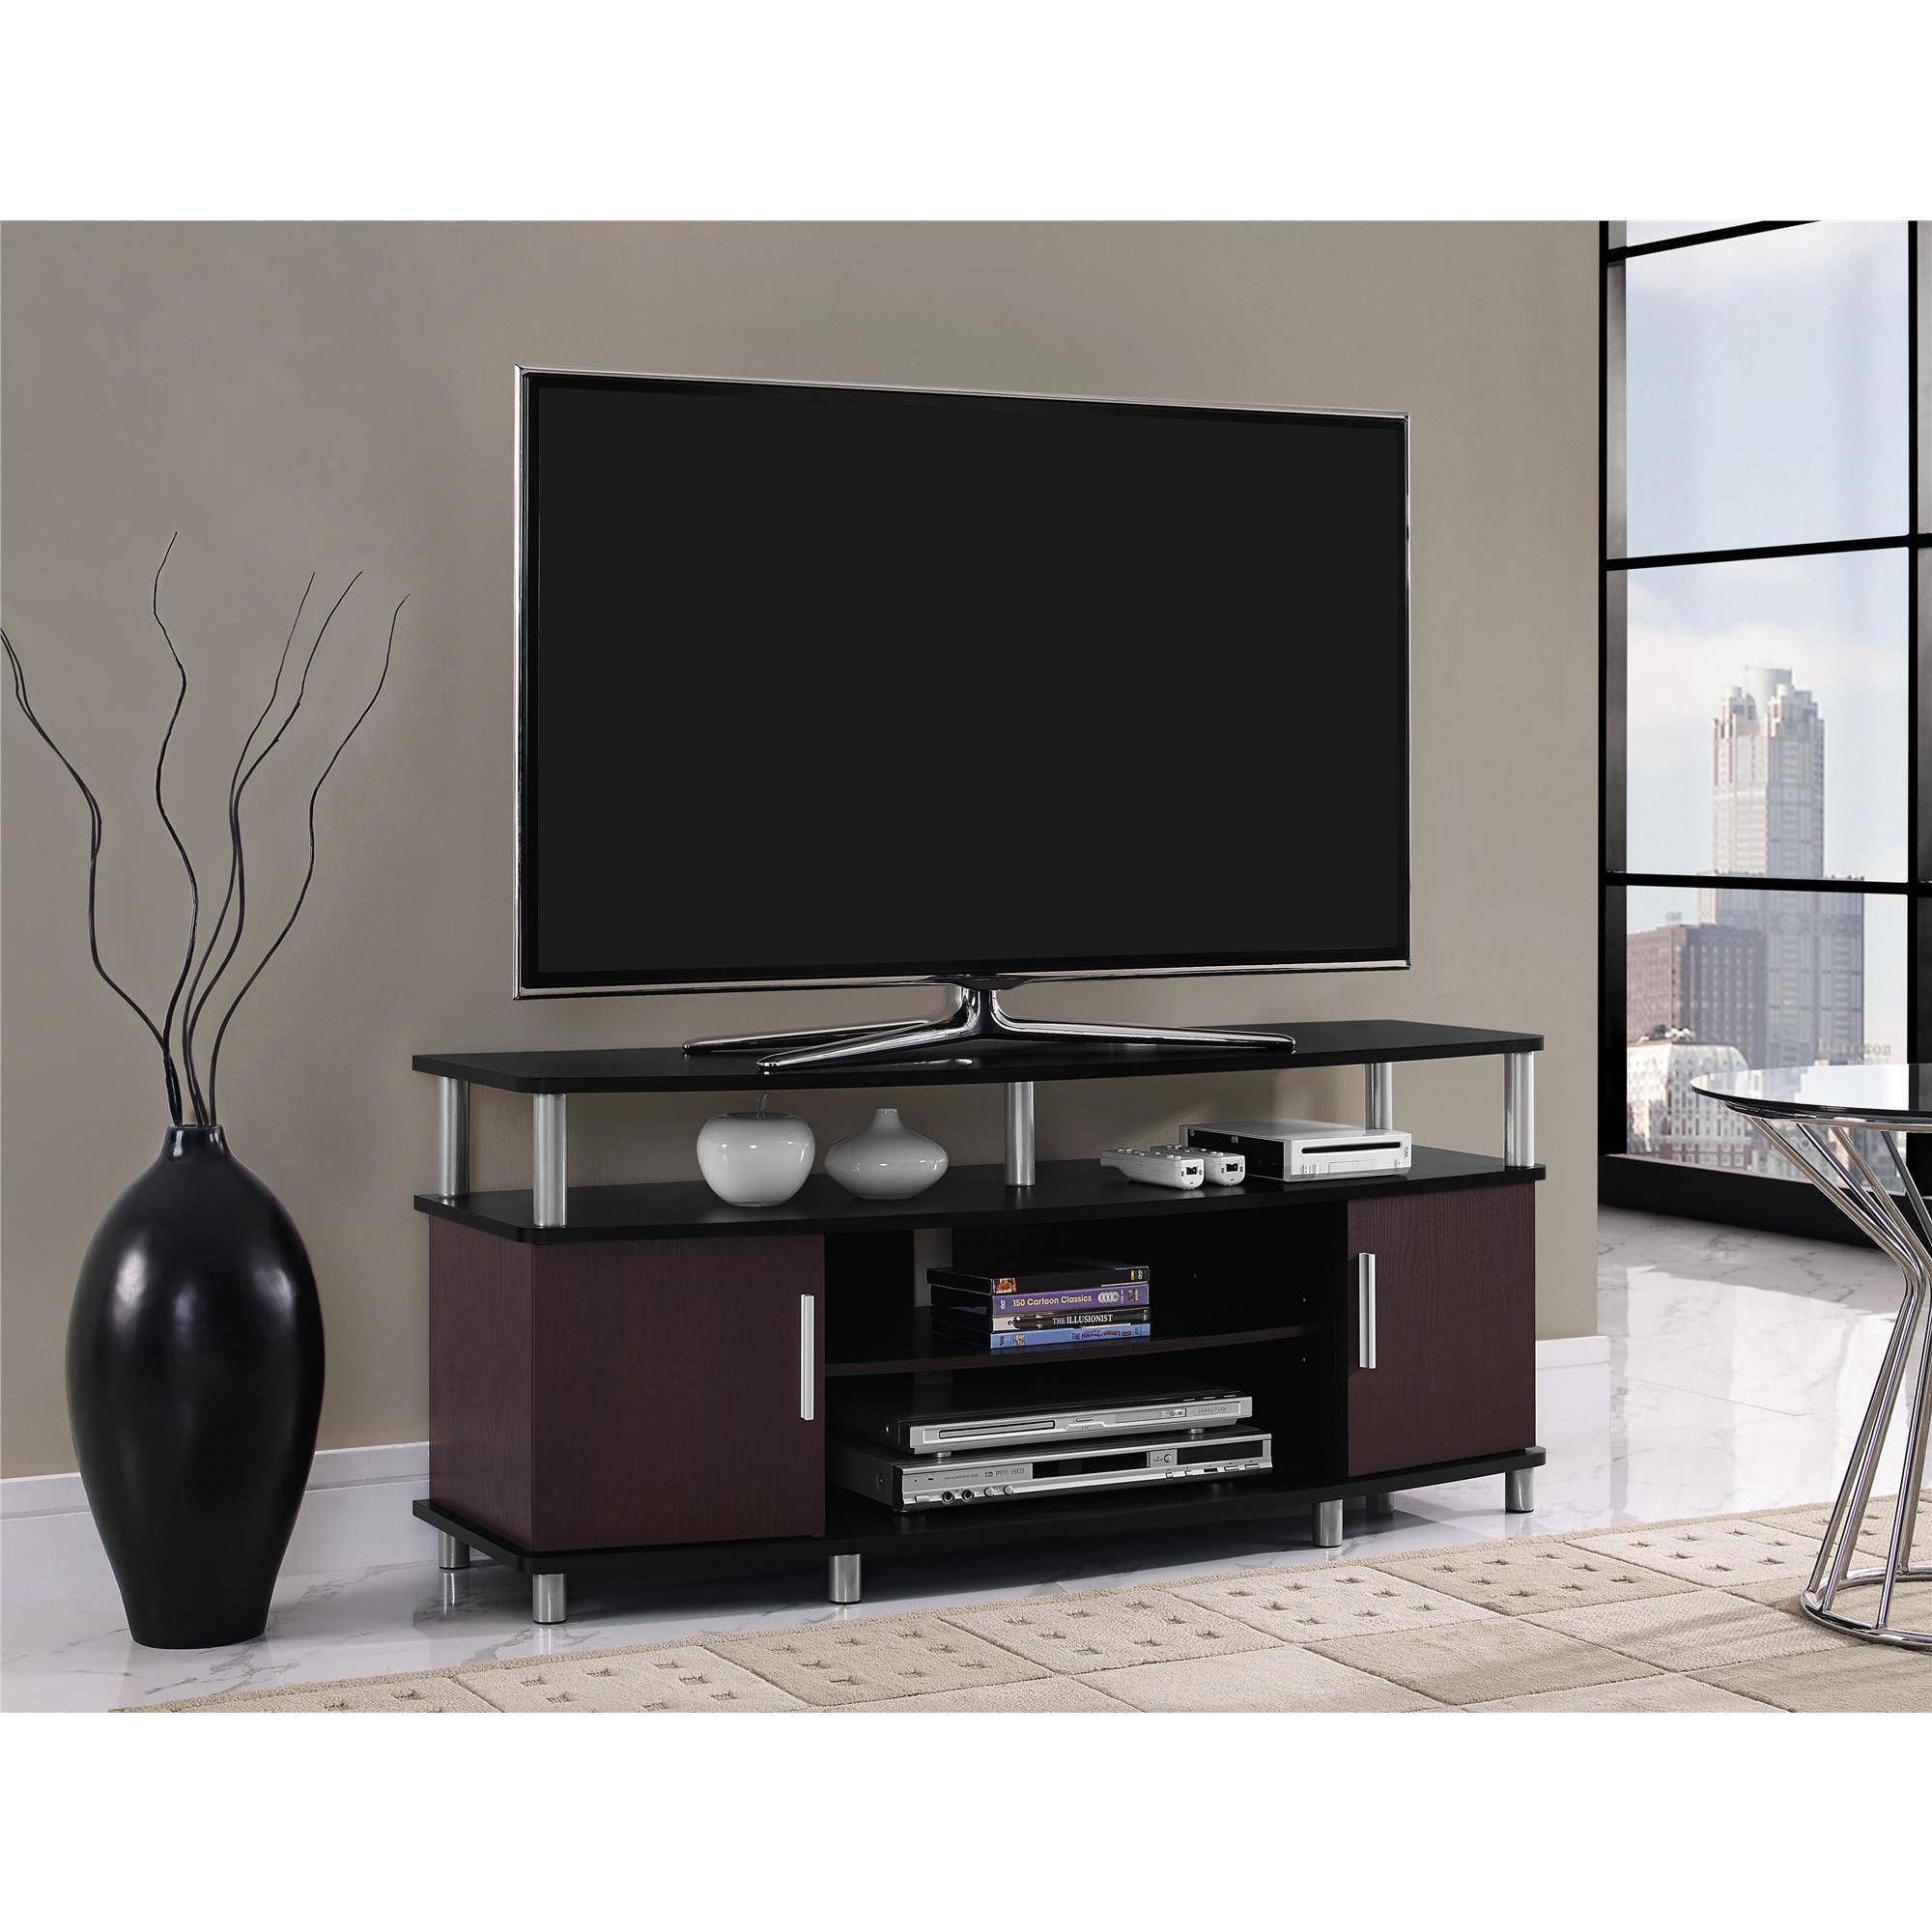 Tv Stands & Entertainment Centers – Walmart Within Tv Cabinets With Storage (View 14 of 15)